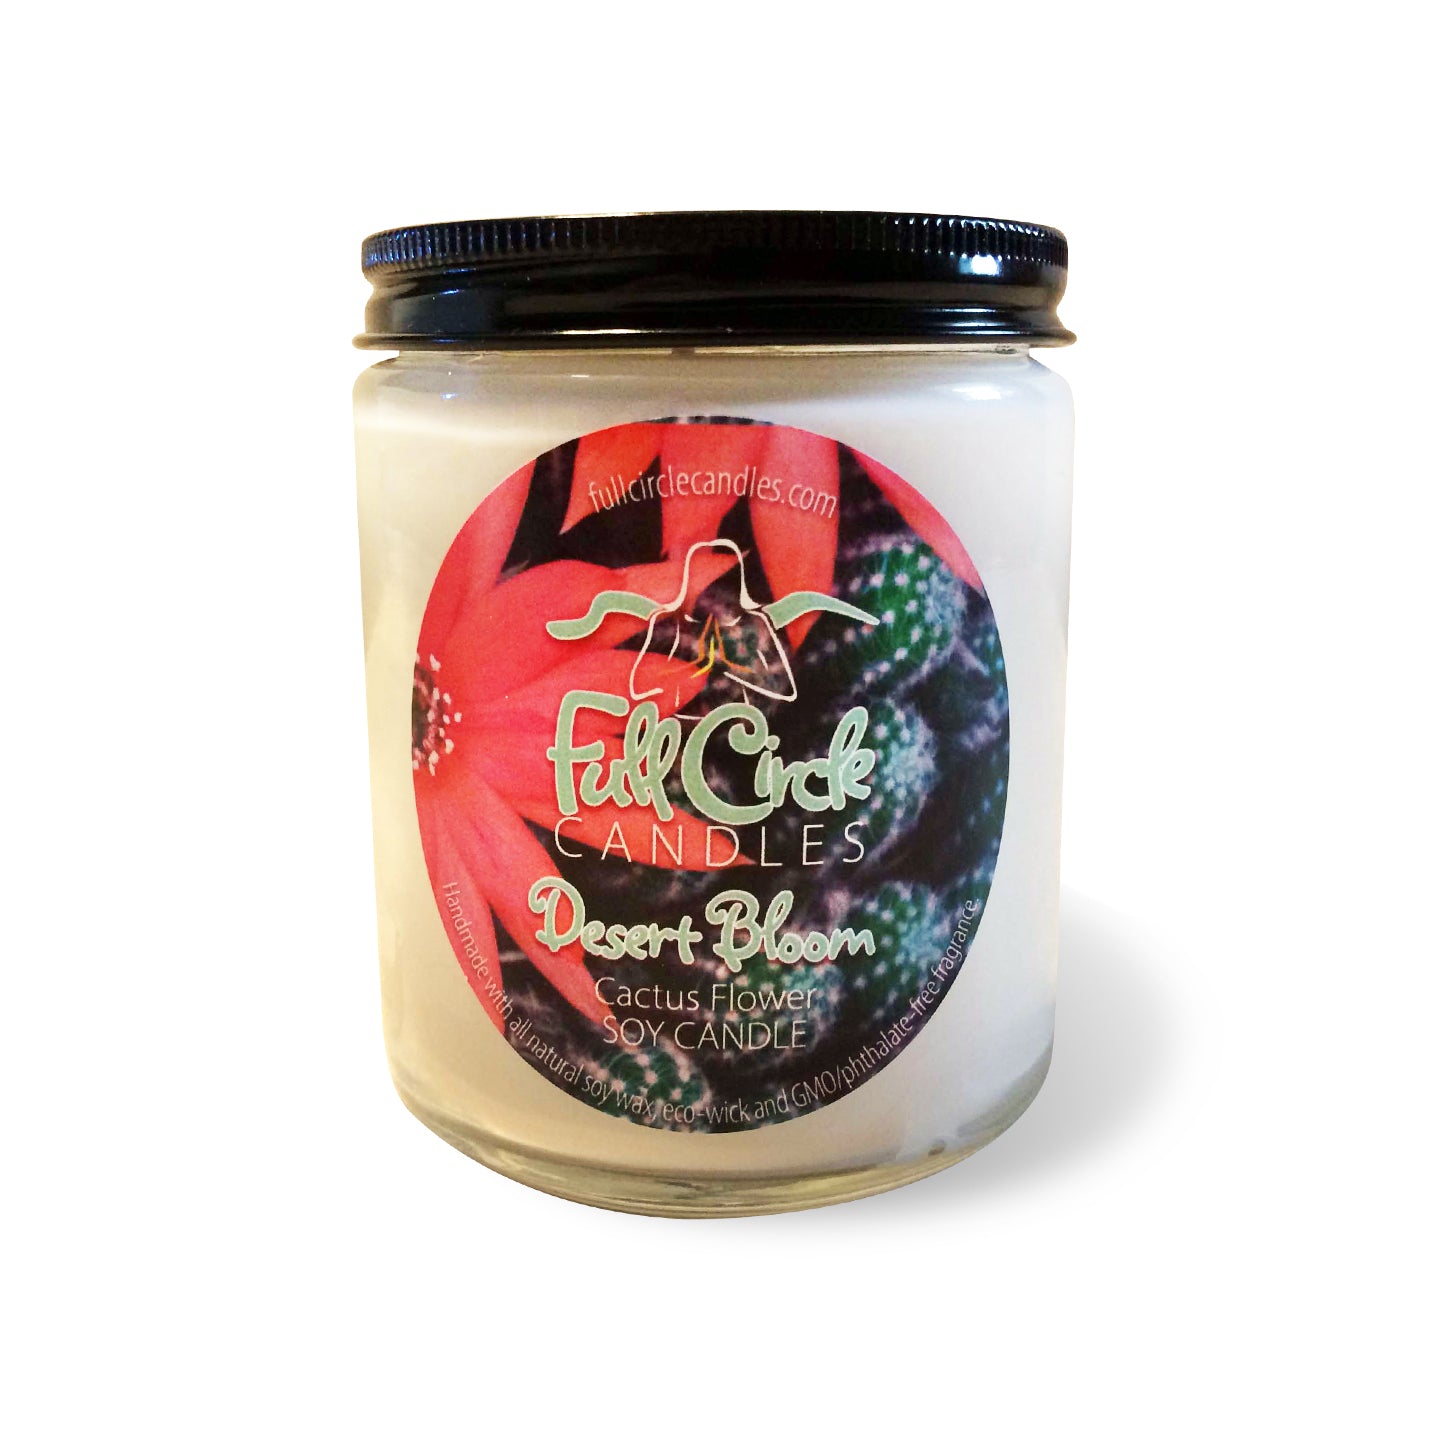 Cactus Flower Floral Soy Candle